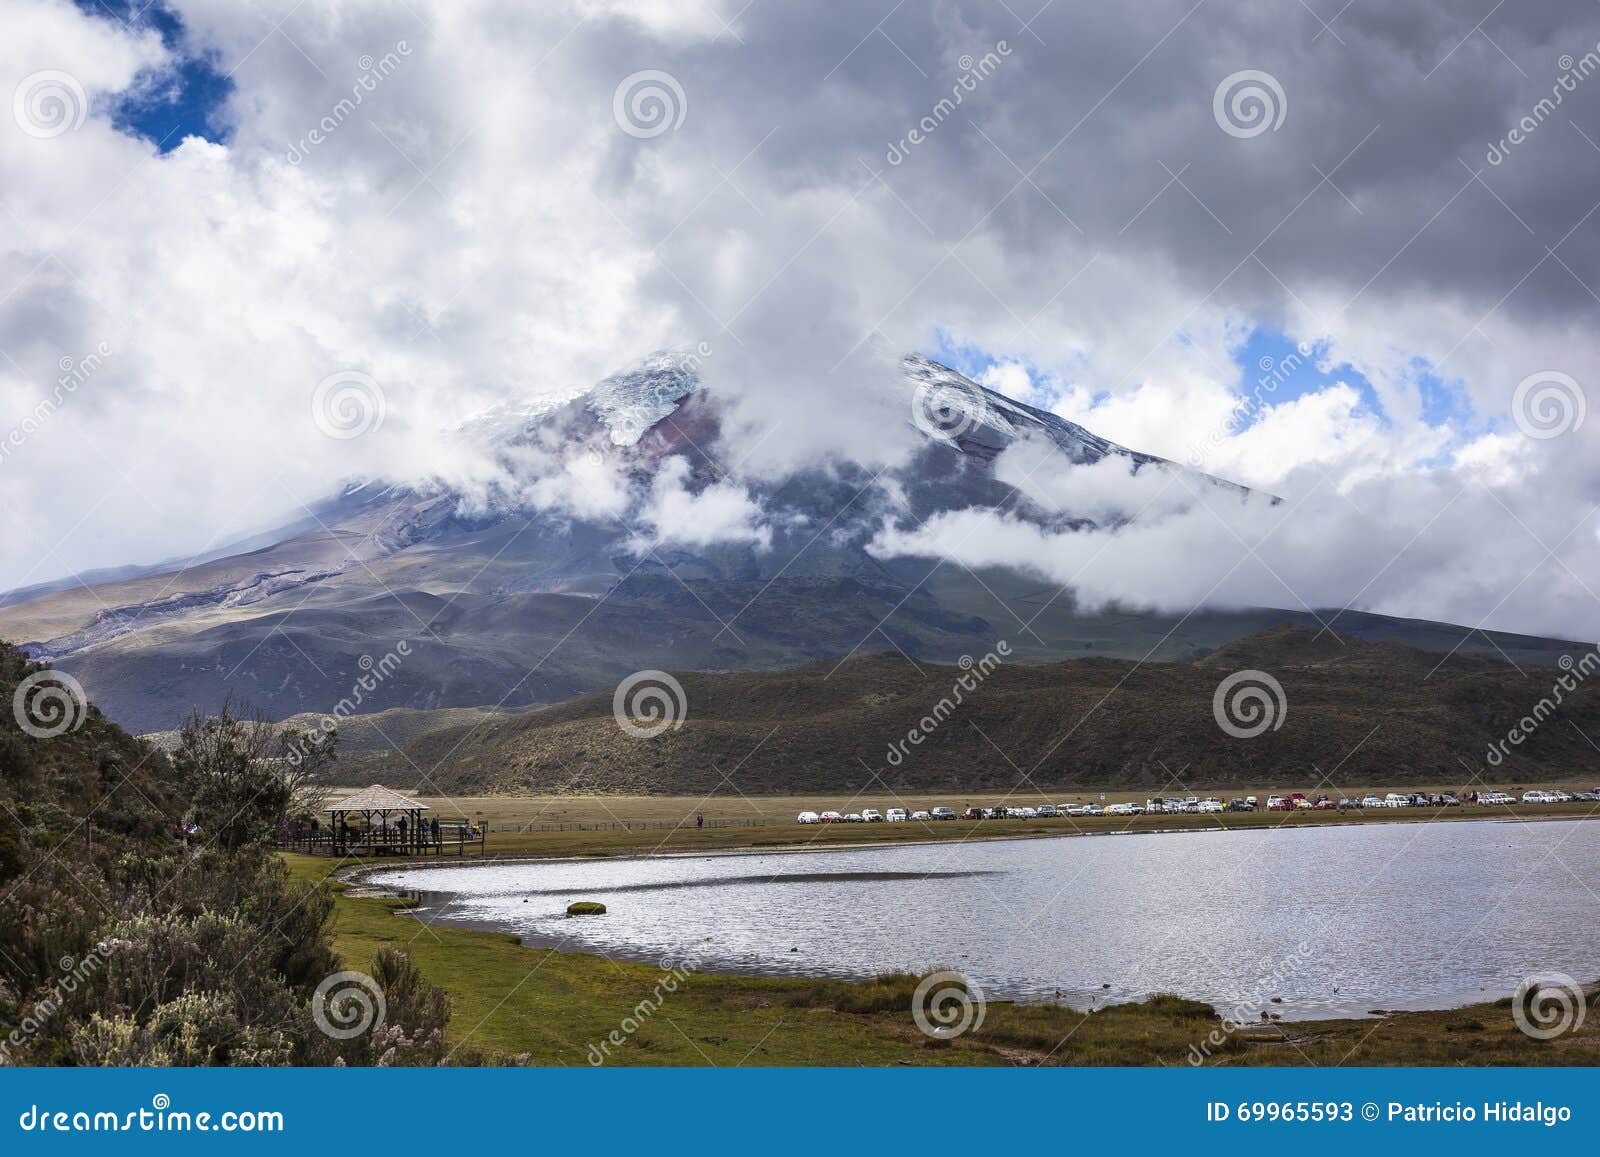 Hundreds of People Visit the Cotopaxi National Park Editorial Stock ...